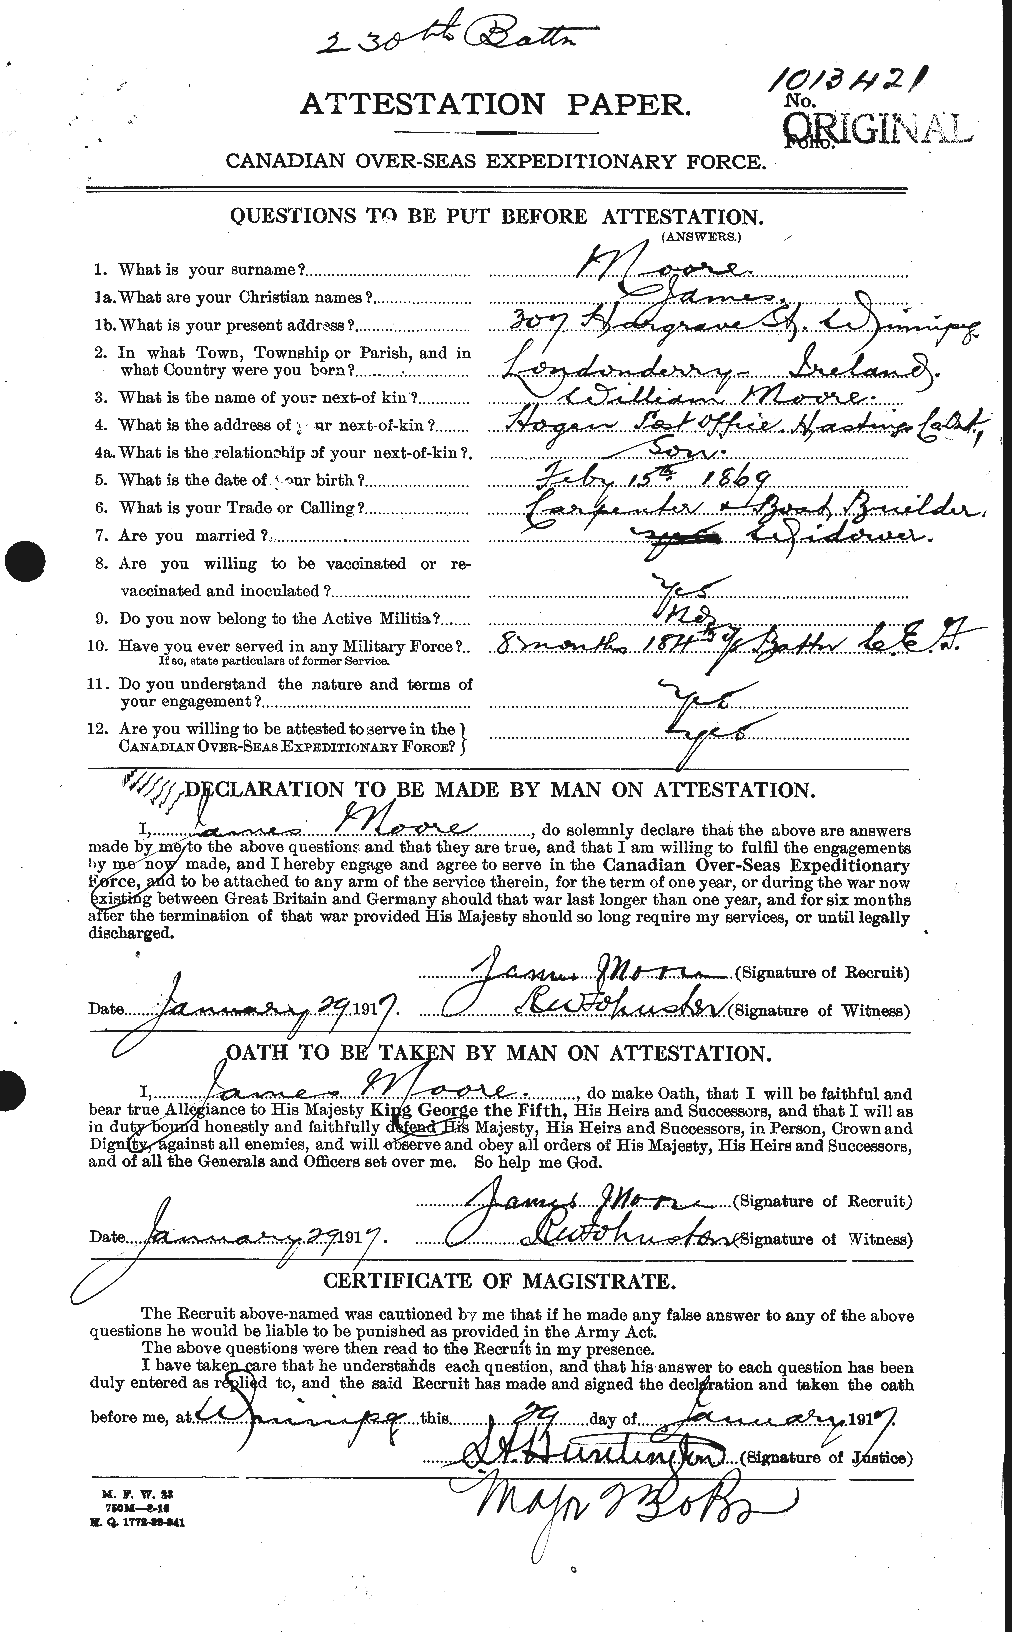 Personnel Records of the First World War - CEF 502173a